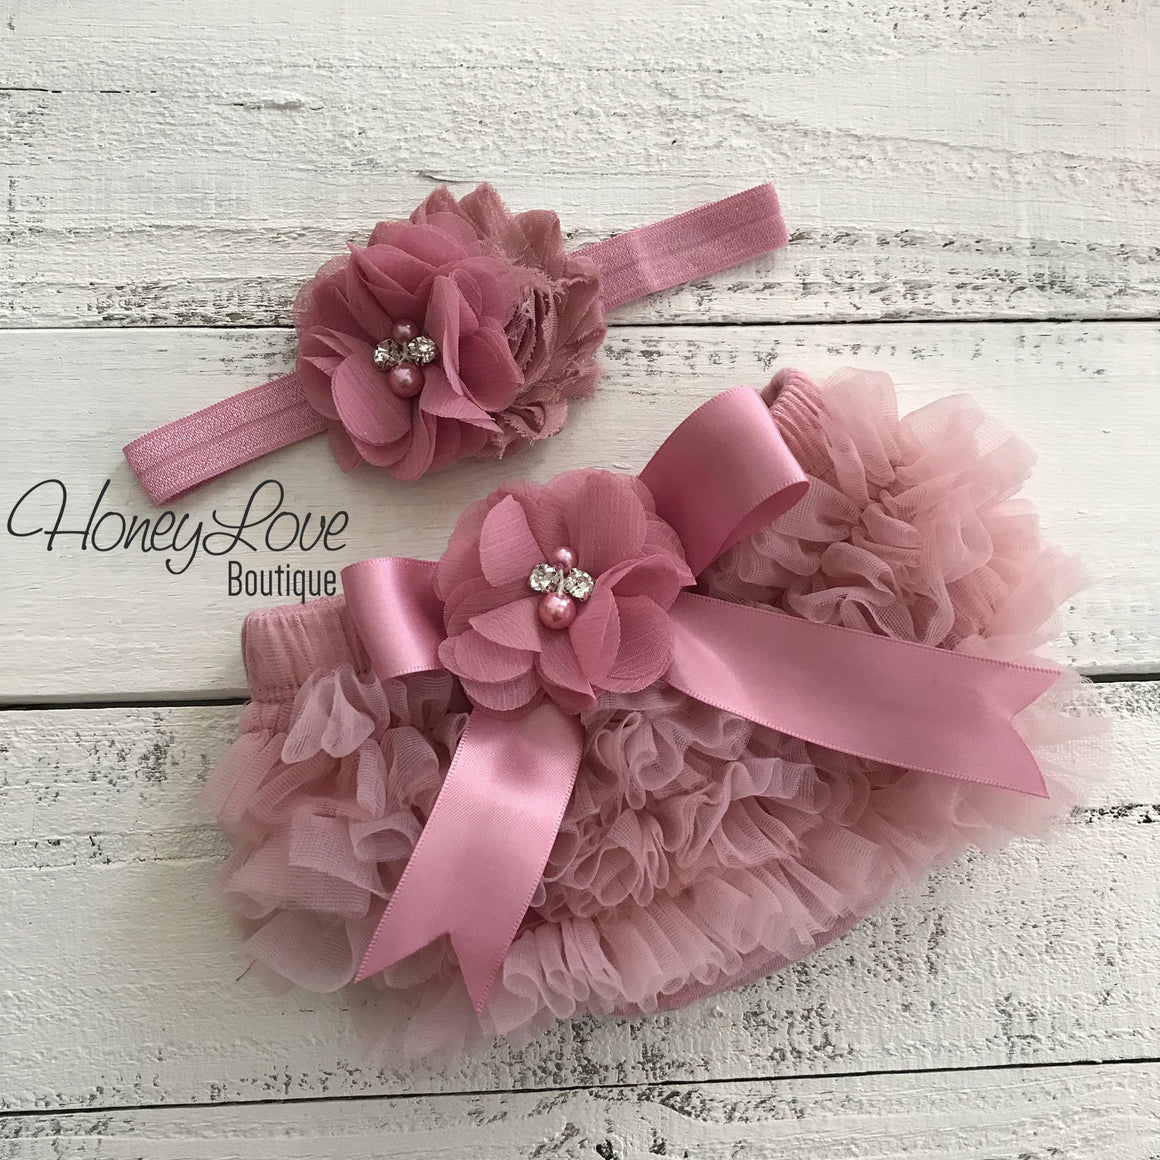 Vintage Pink ruffle bottom bloomers and headband - embellished bloomers - HoneyLoveBoutique